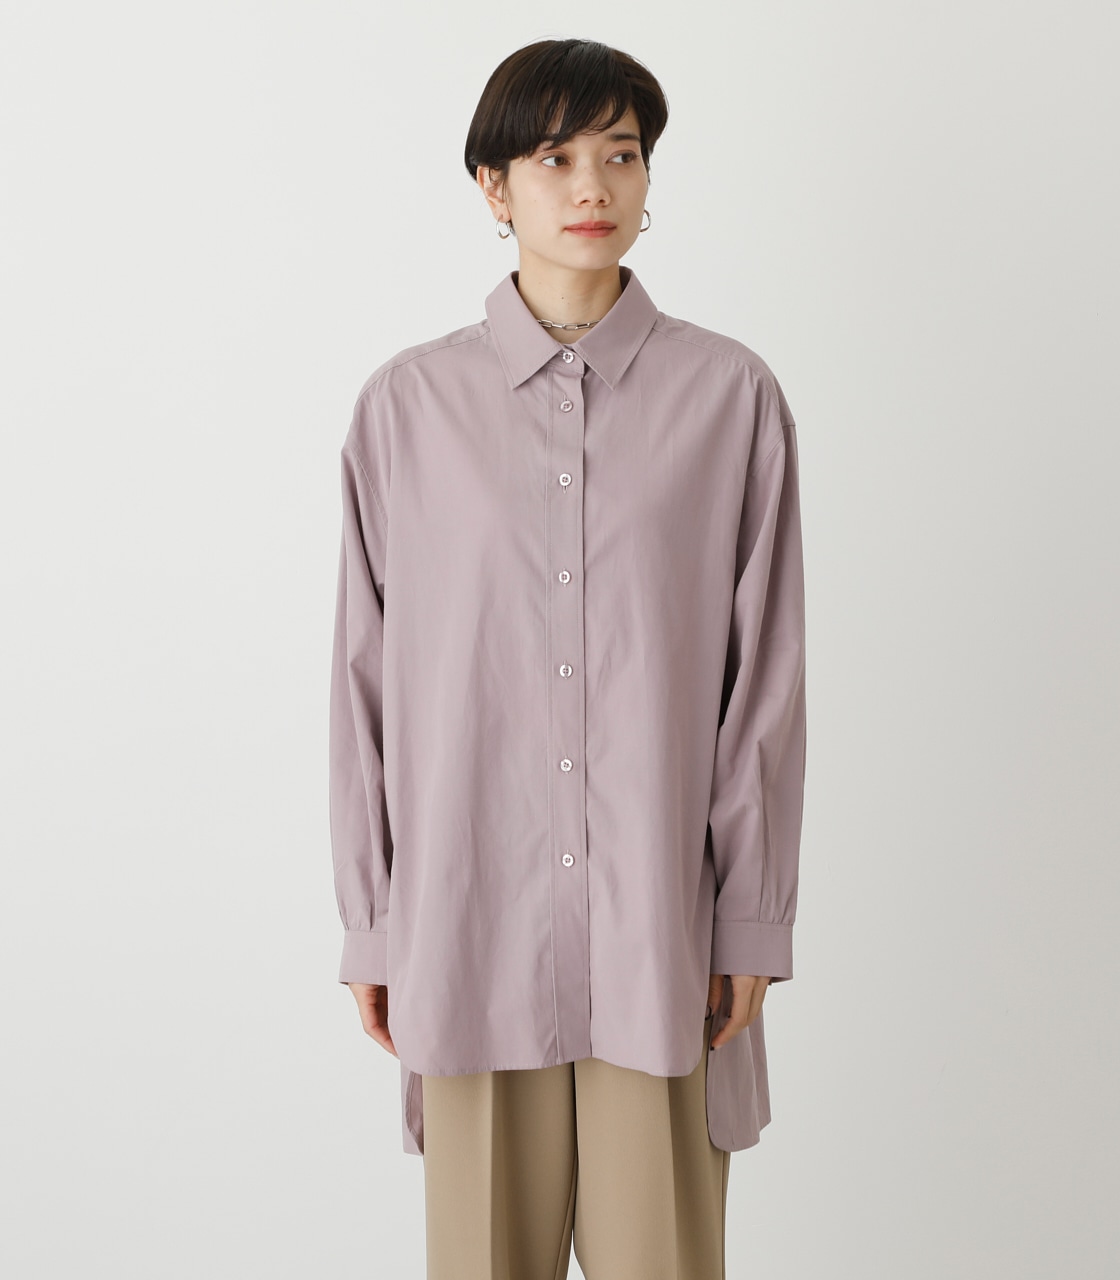 COLOR SIMPLE SHIRTS/カラーシンプルシャツ 詳細画像 L/PUR 5